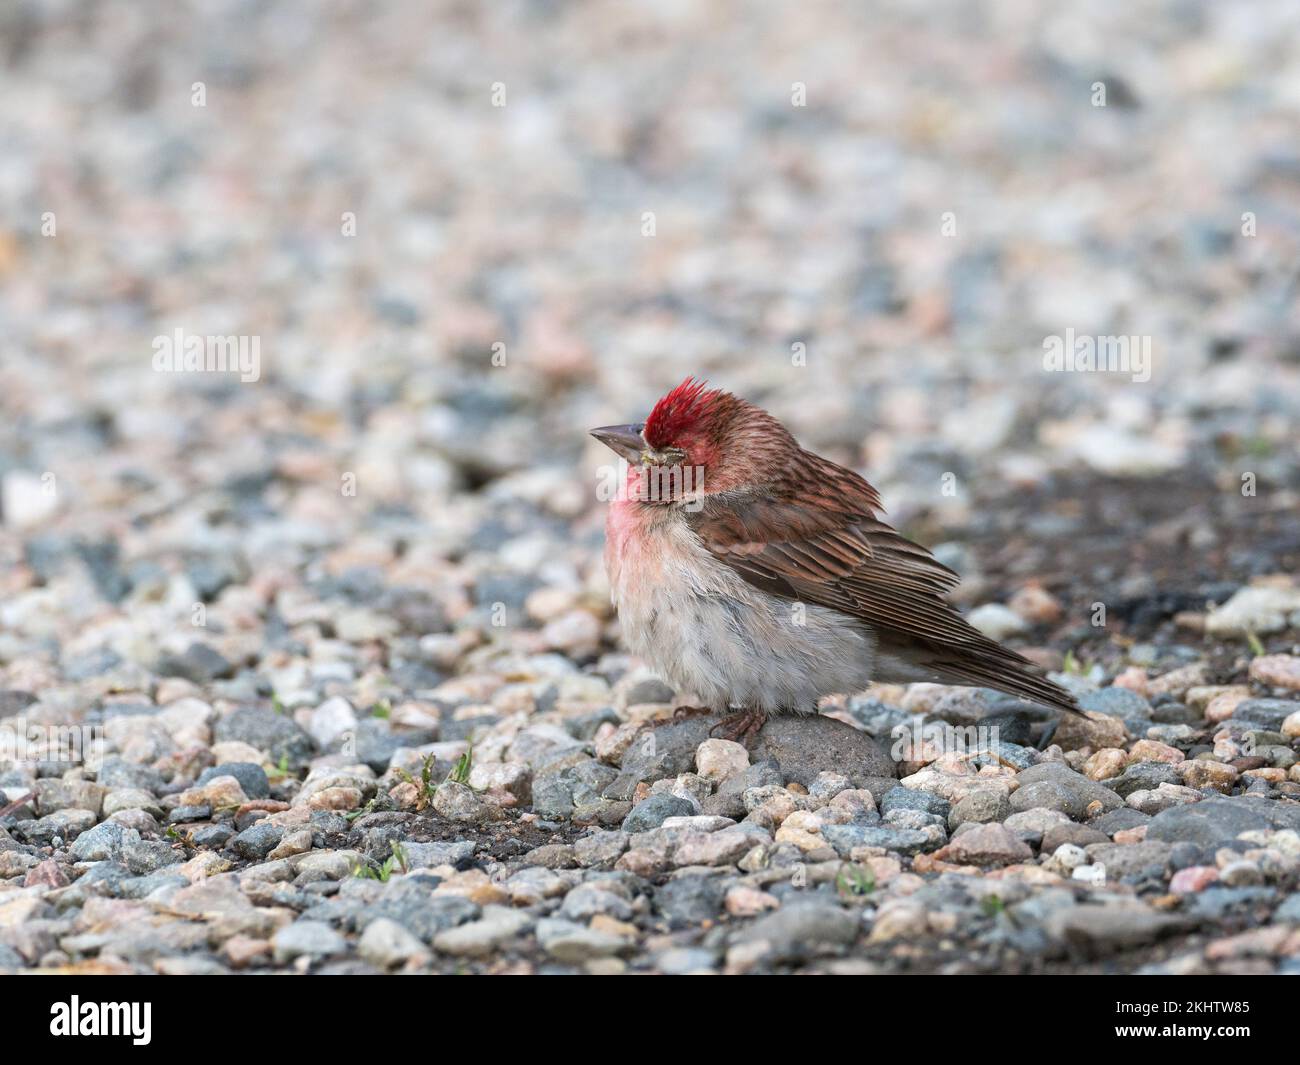 Cassin's finch Carpodacus cassinii male, possible sick or injured bird on the roadside, Cooke City, Montana, USA, June 2019 Stock Photo